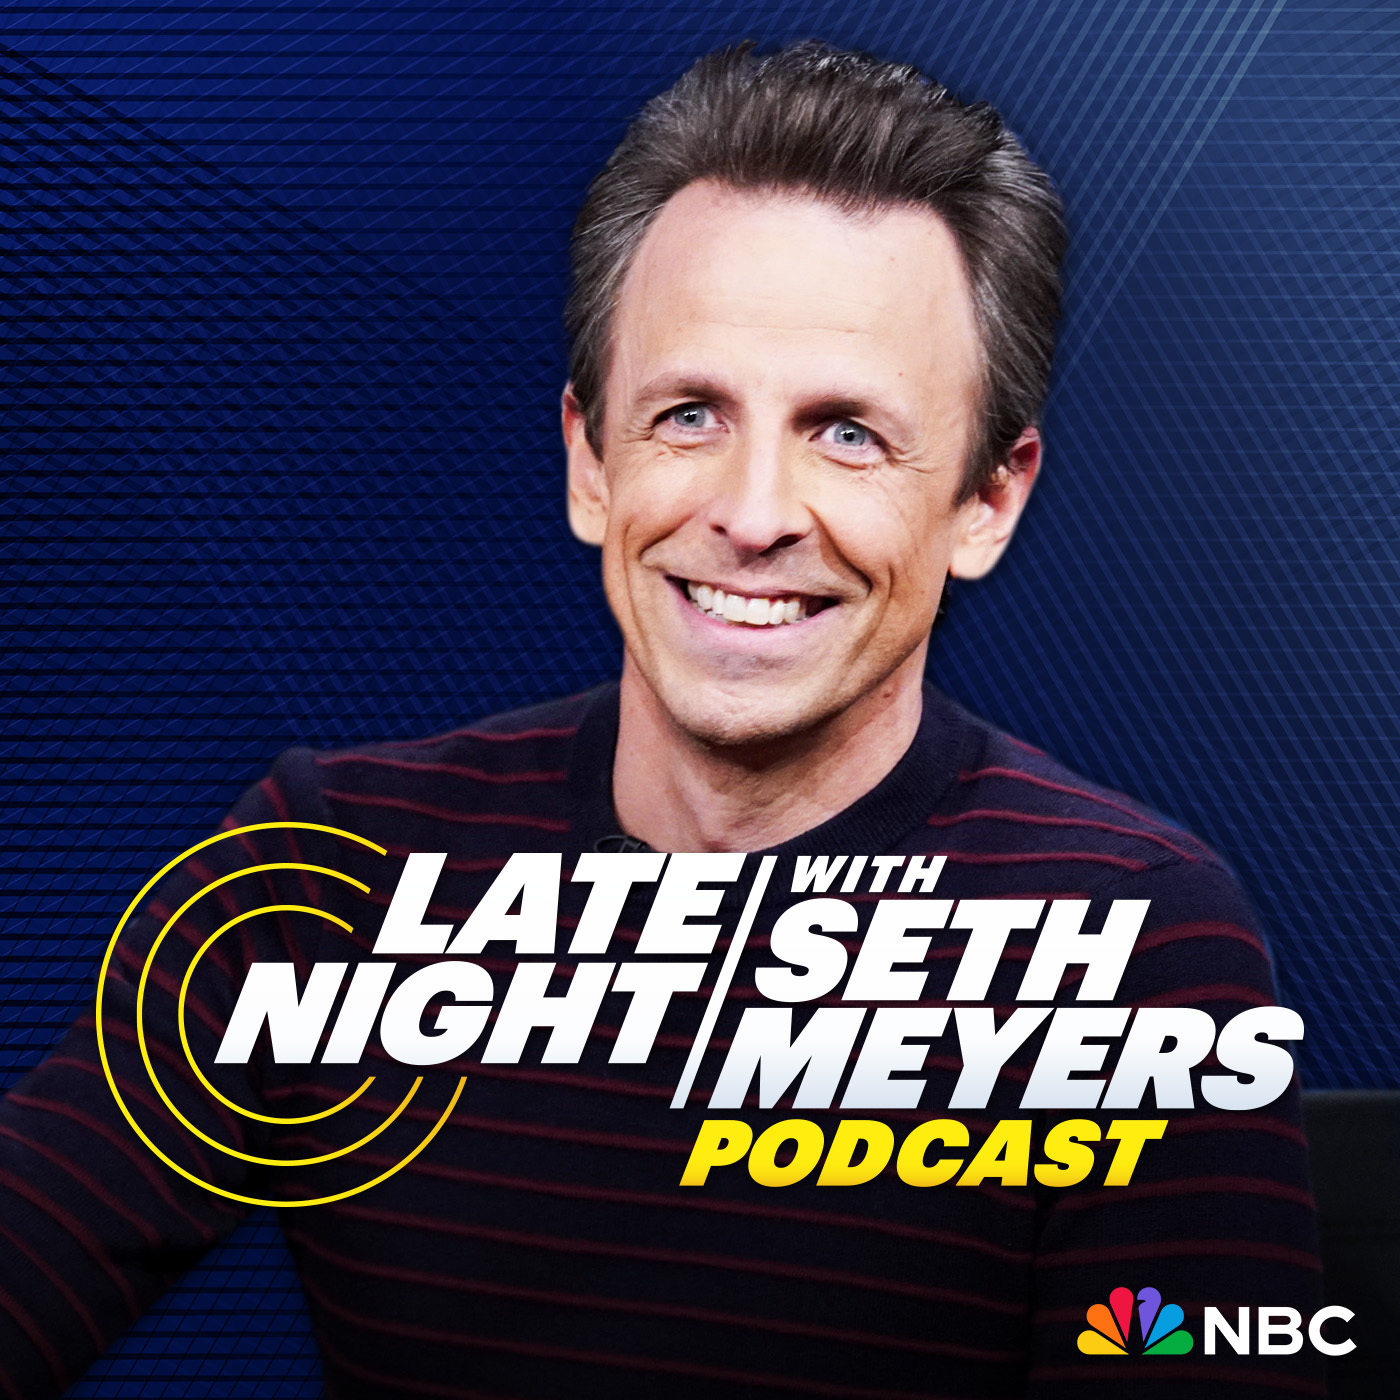 Late Night with Seth Meyers Podcast podcast